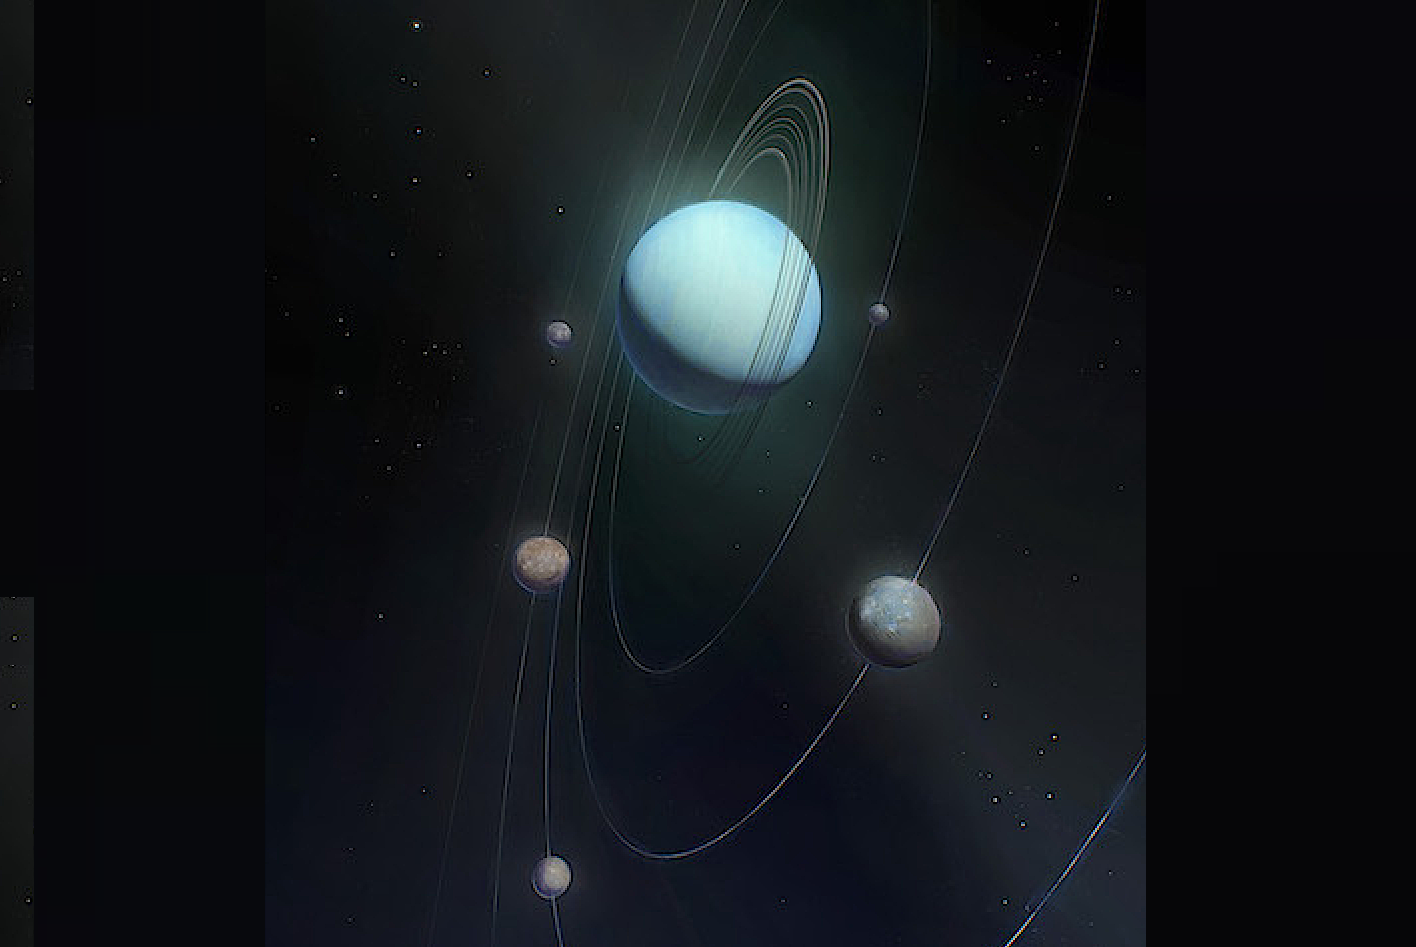 Two Of Uranus’ Moons May Harbor Active Oceans, Radiation Data Suggests News Releases